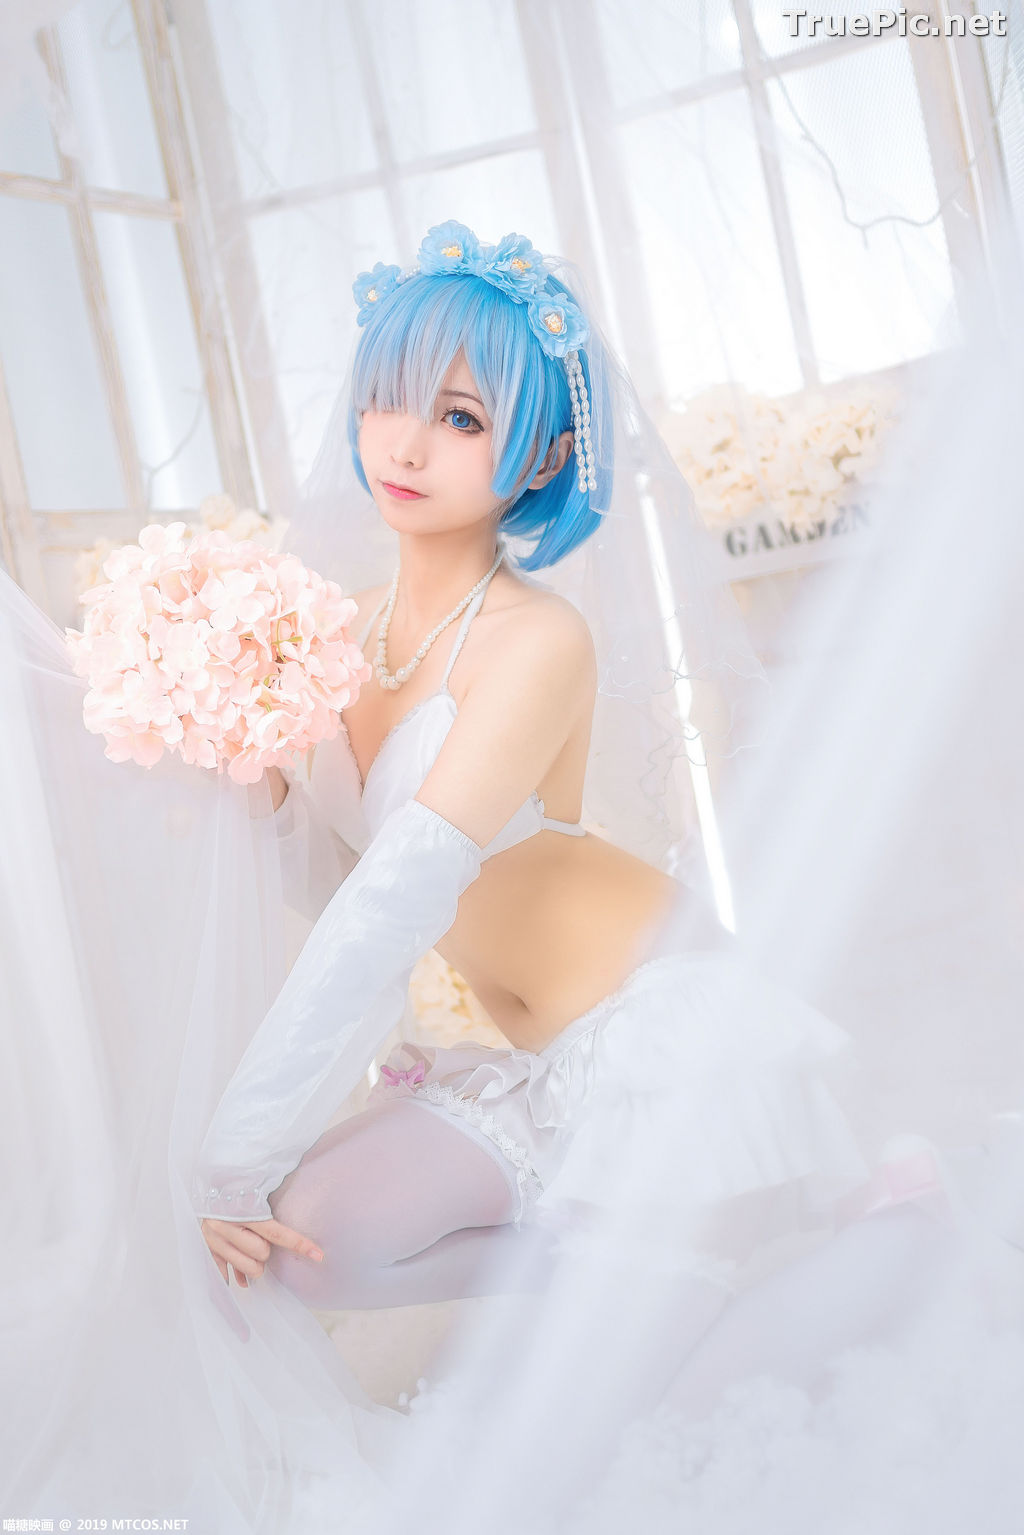 Image [MTCos] 喵糖映画 Vol.029 – Chinese Cute Model – Bride Rem Cosplay - TruePic.net - Picture-18